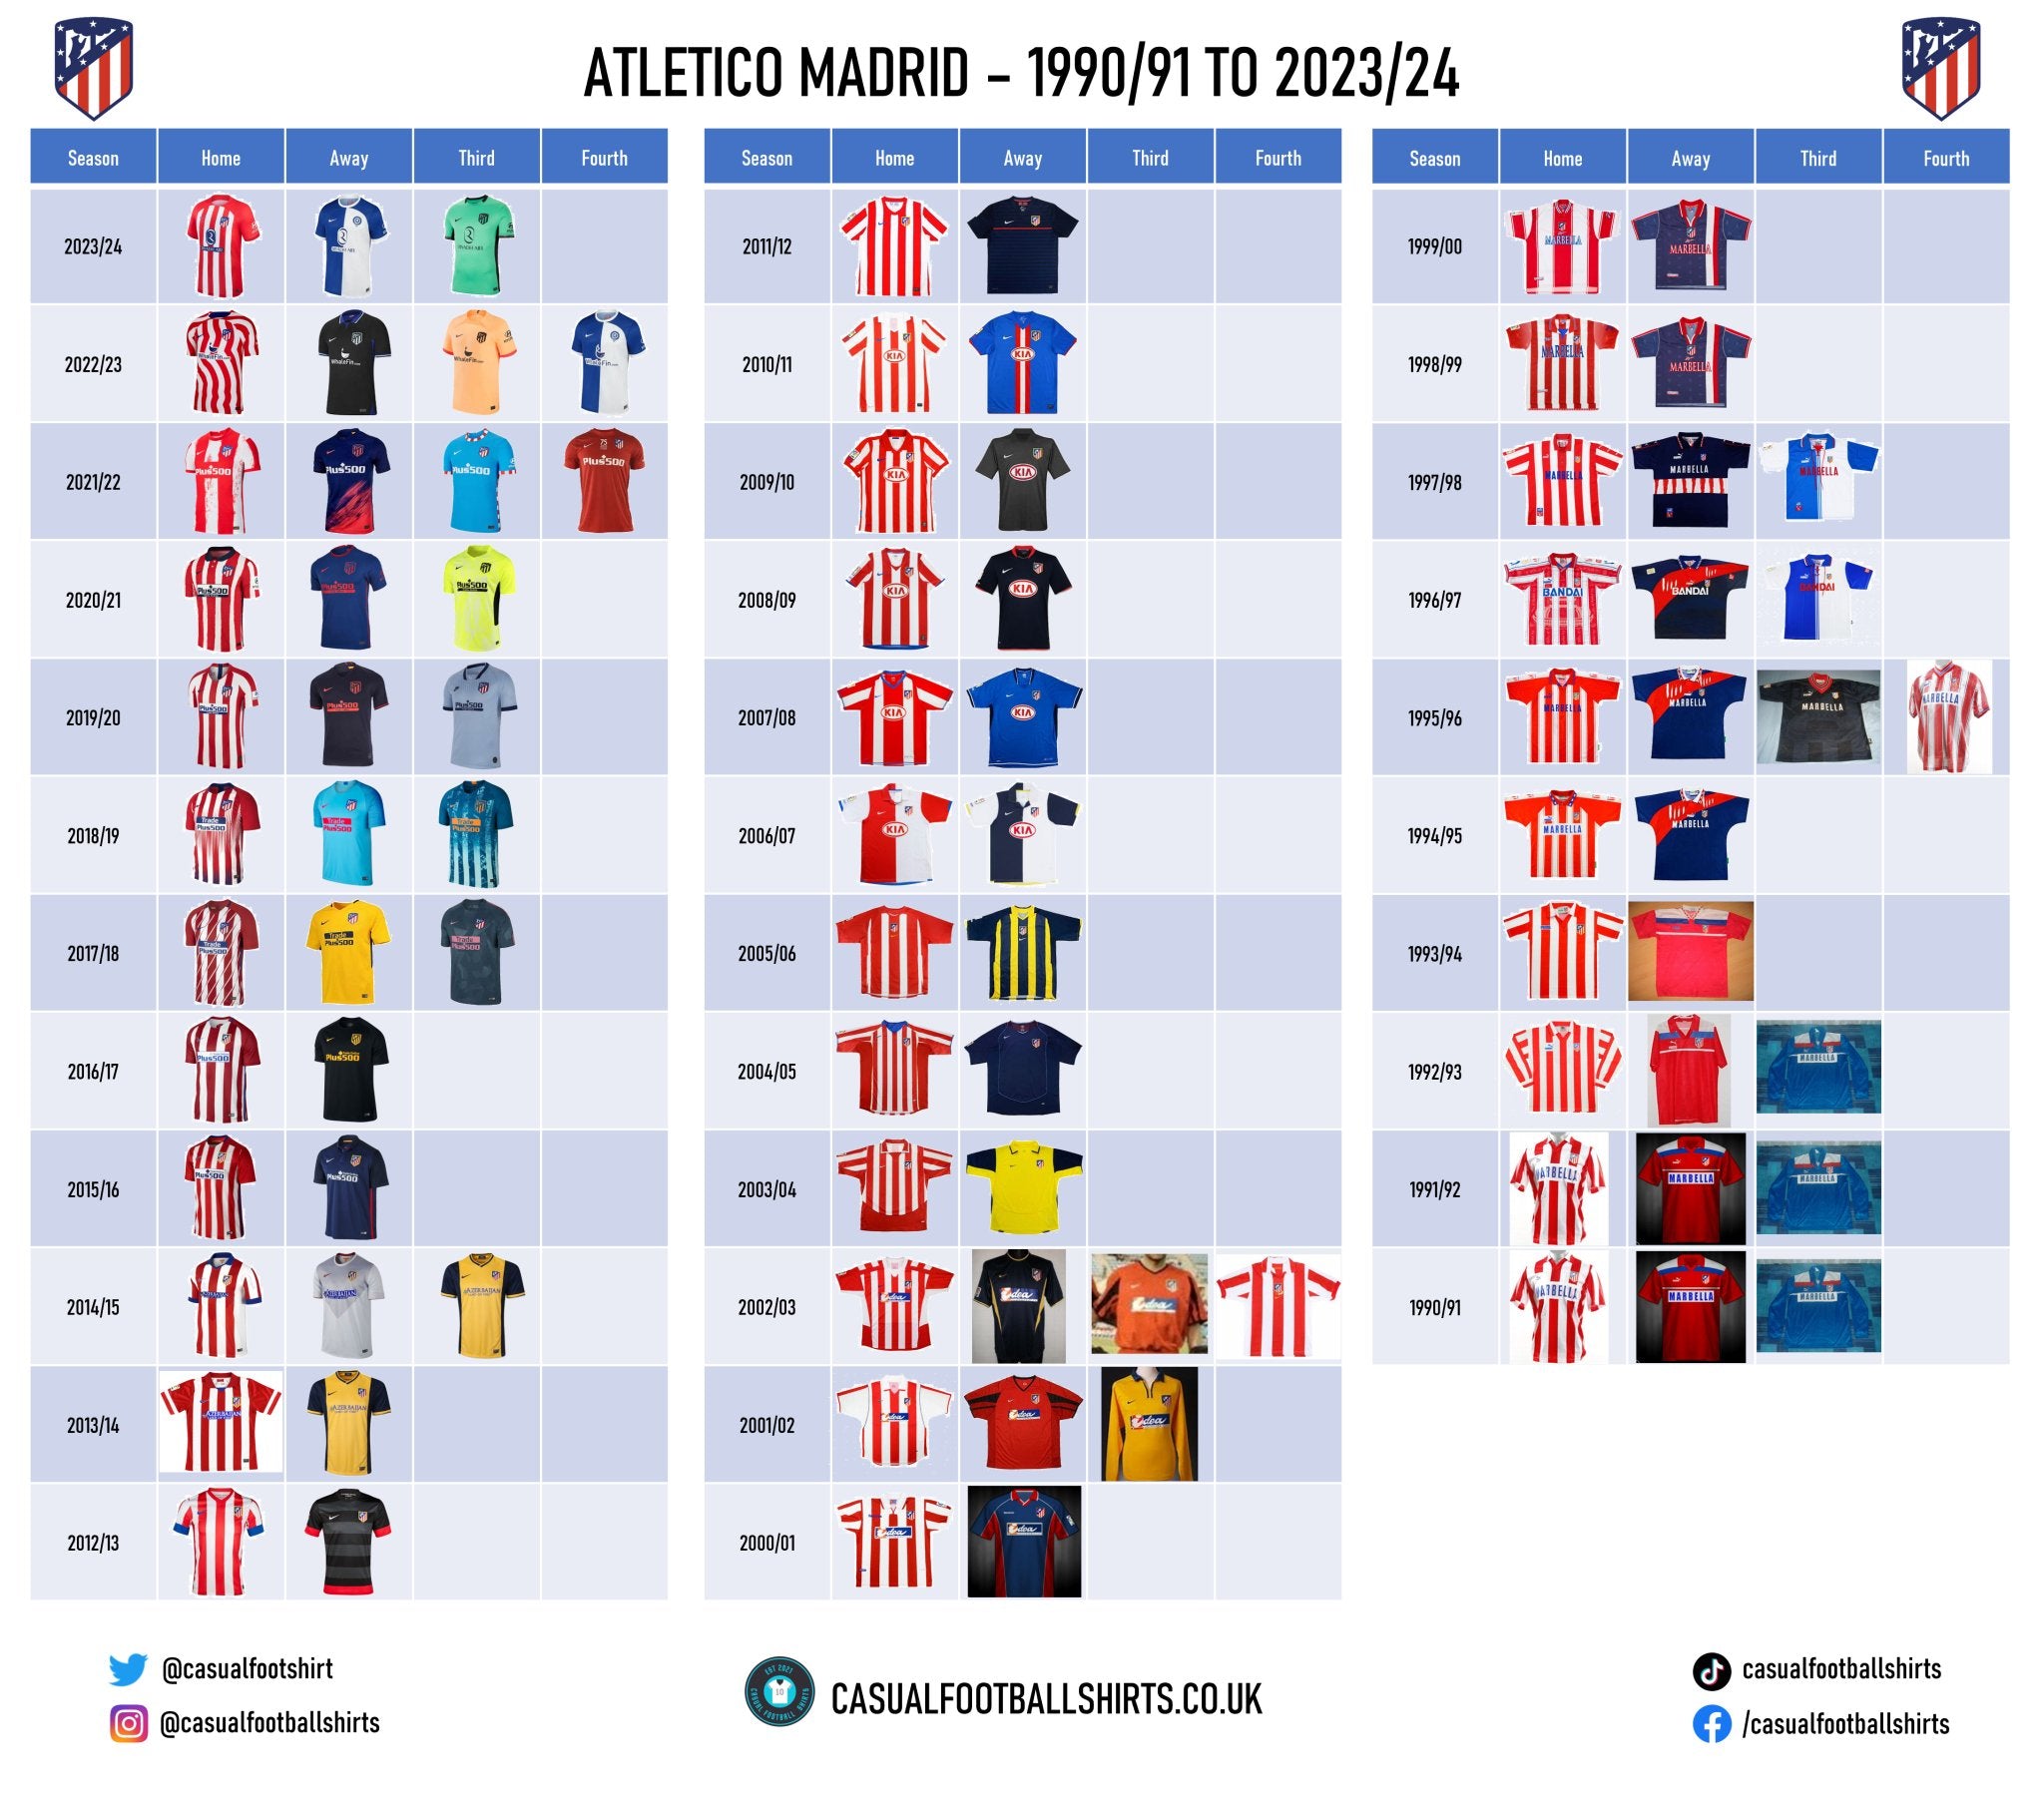 Atletico Madrid Shirt History - Downloadable Graphic